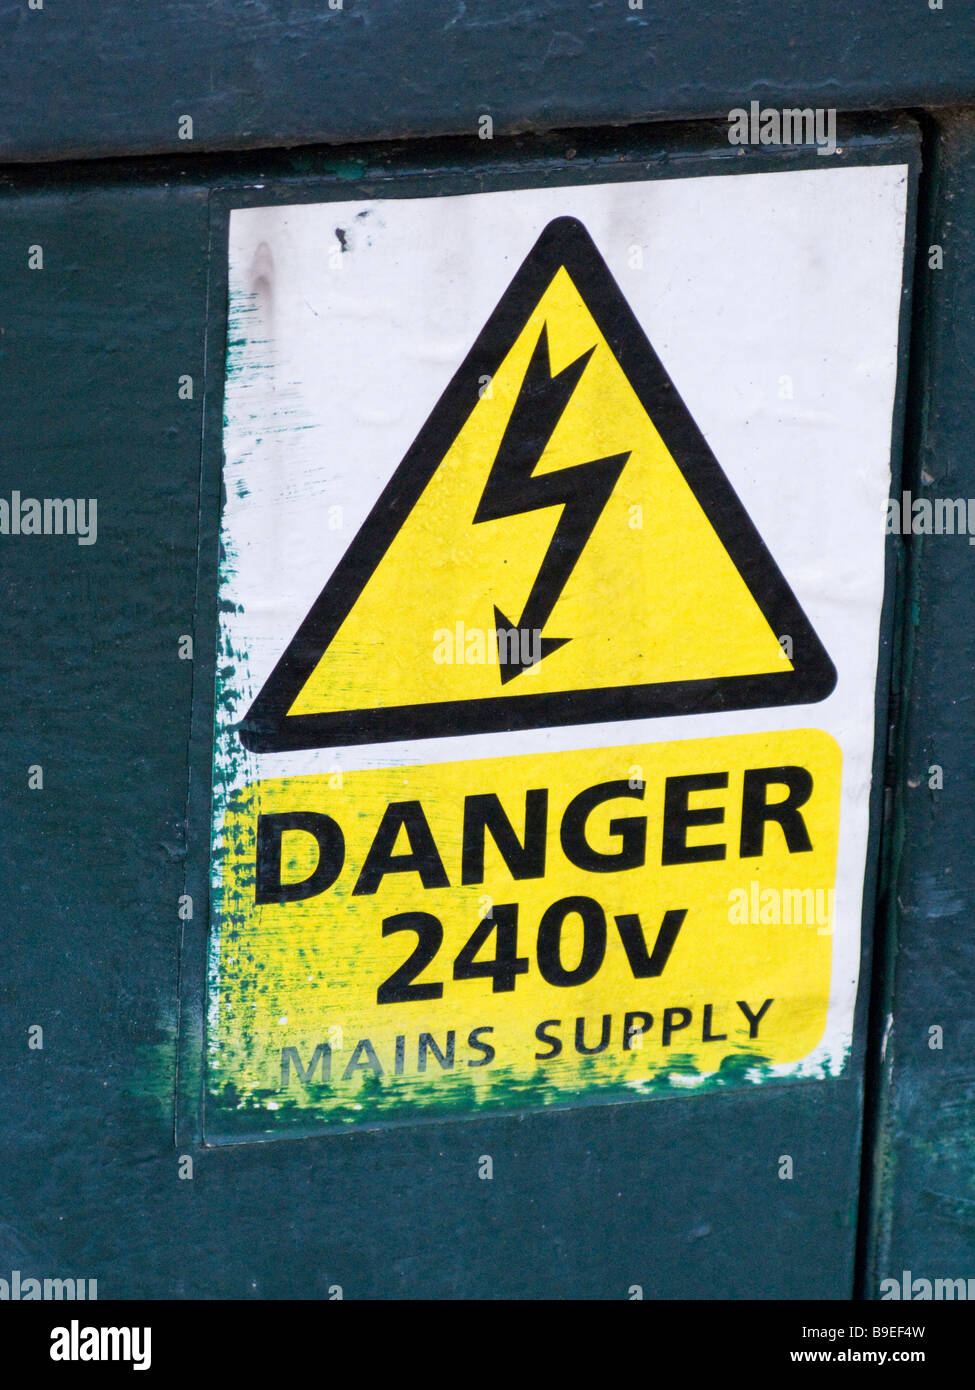 'Danger 240 volts' sign on a Virgin Media cable TV / broadband connection junction box in the street. Stock Photo